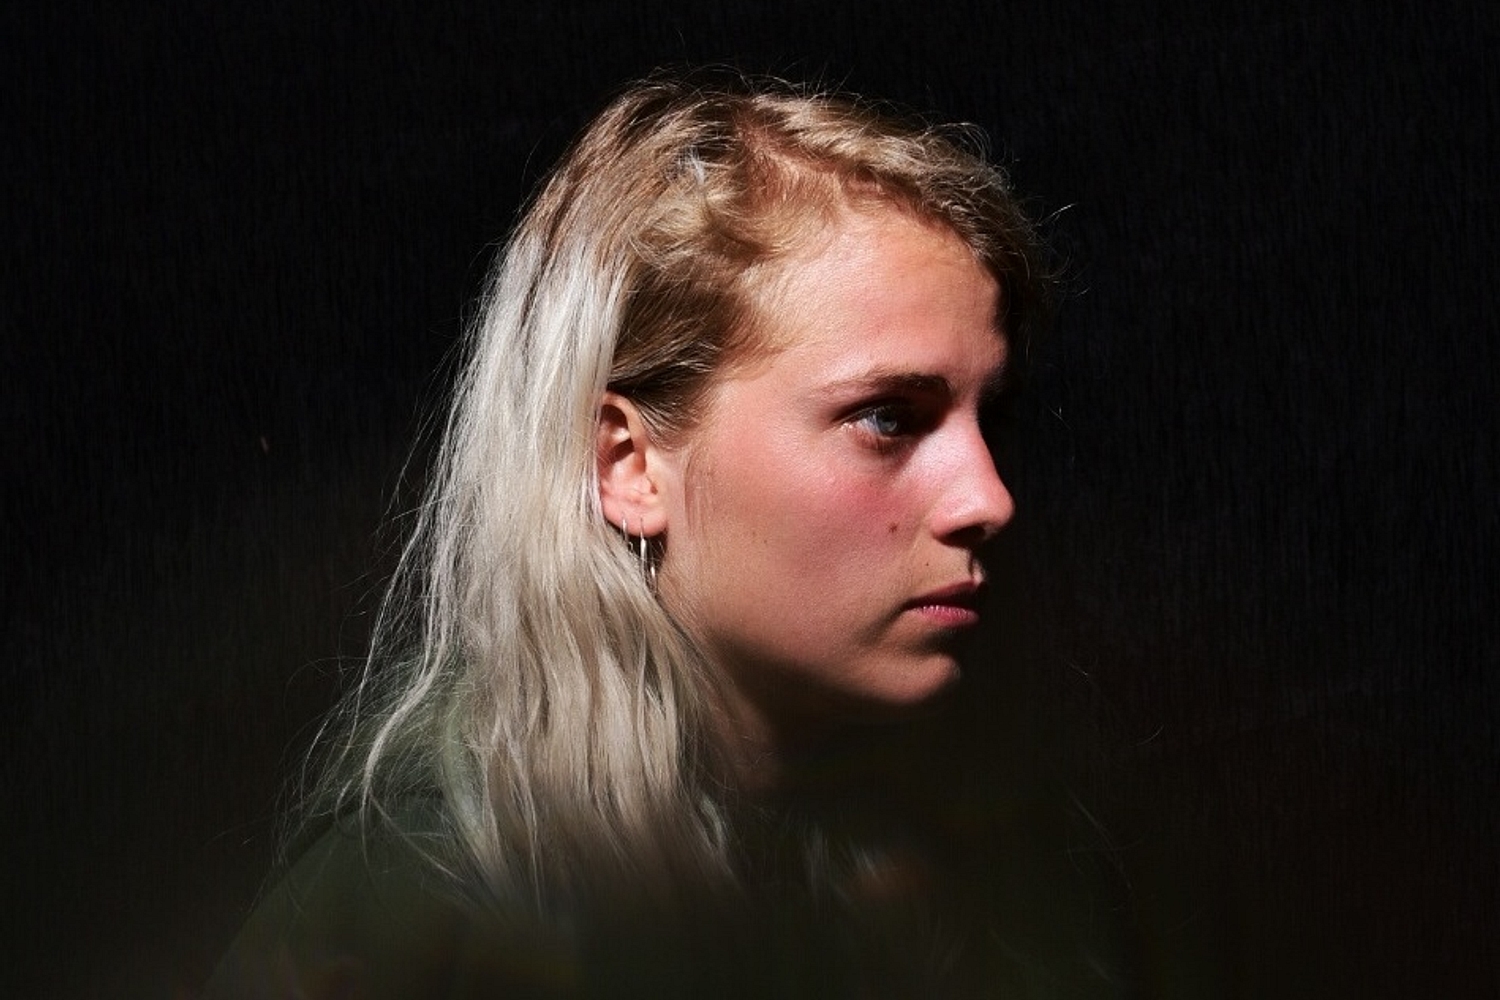 Marika Hackman: "I didn’t want to go on with aliens crawling out of my throat while singing”